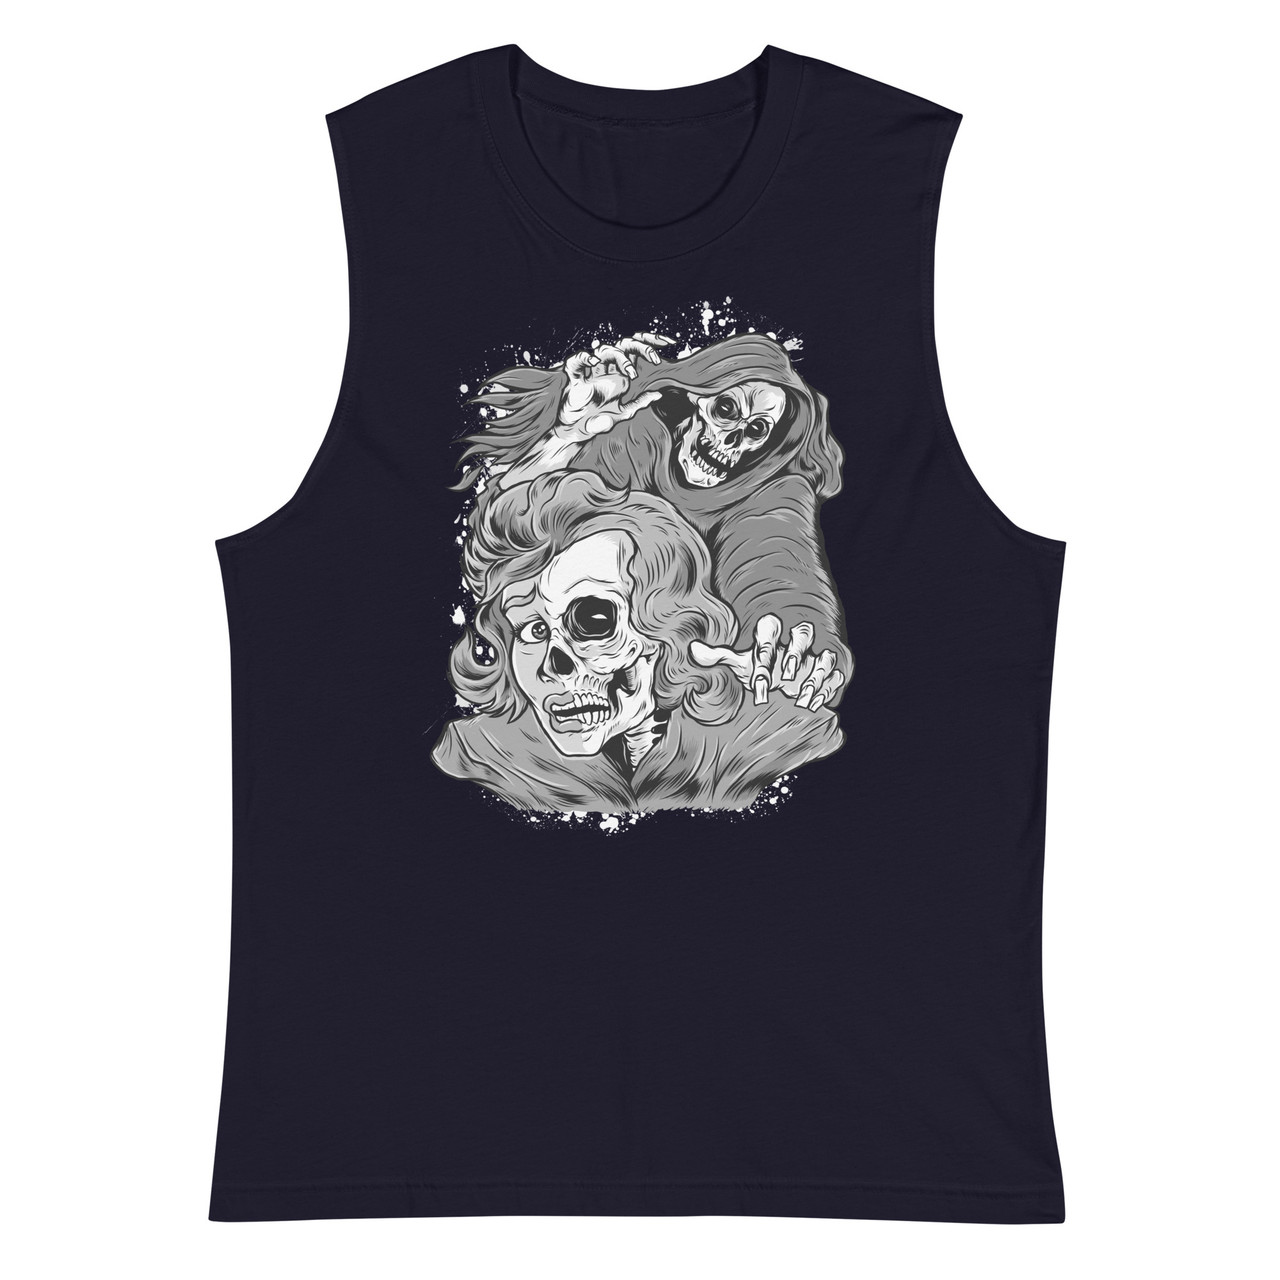 The Reaper and the Lady Unisex Muscle Shirt - Bella + Canvas 3483 